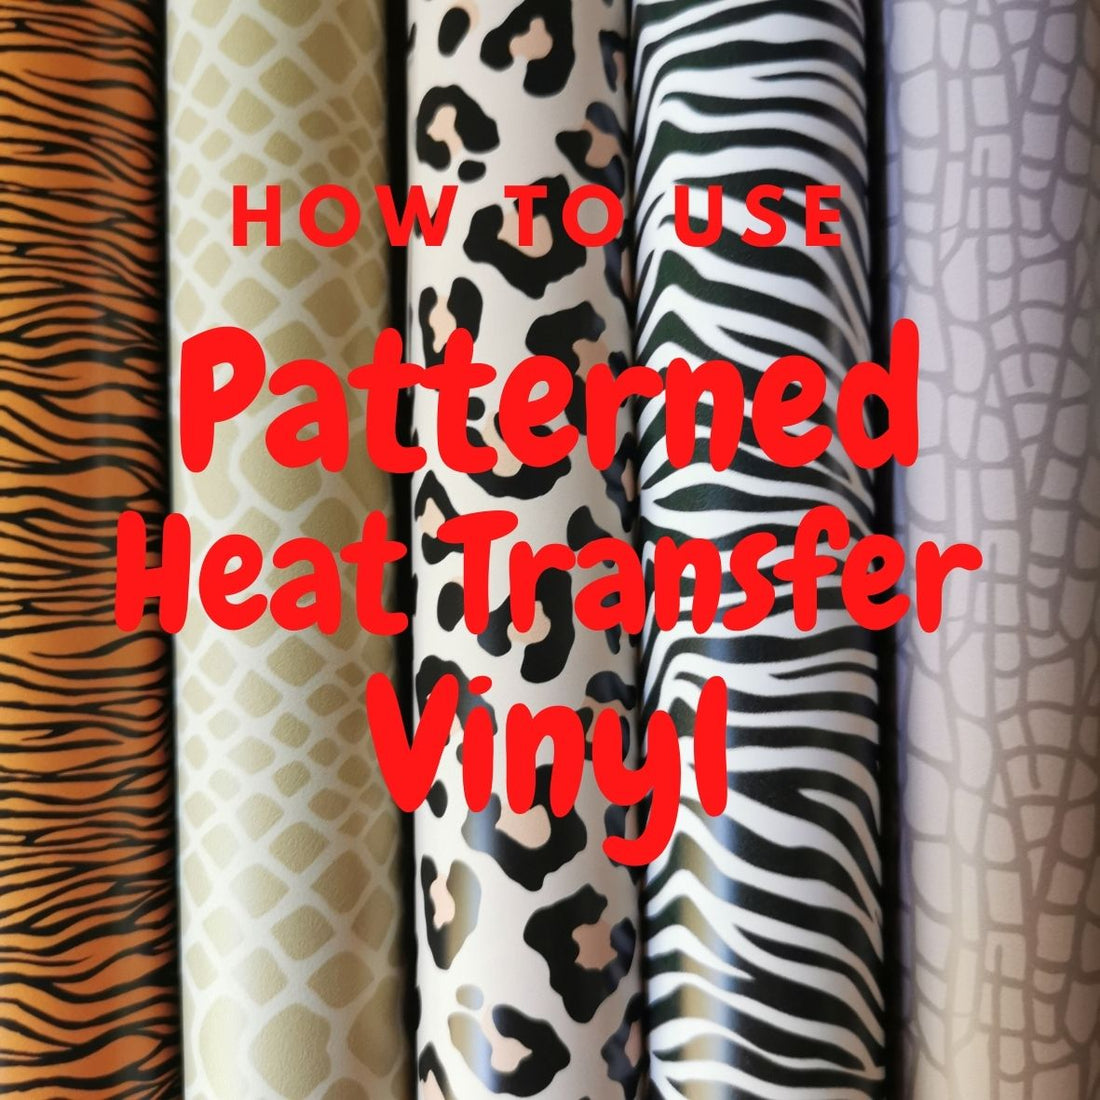 How to apply our Patterned Heat Transfer Vinyl